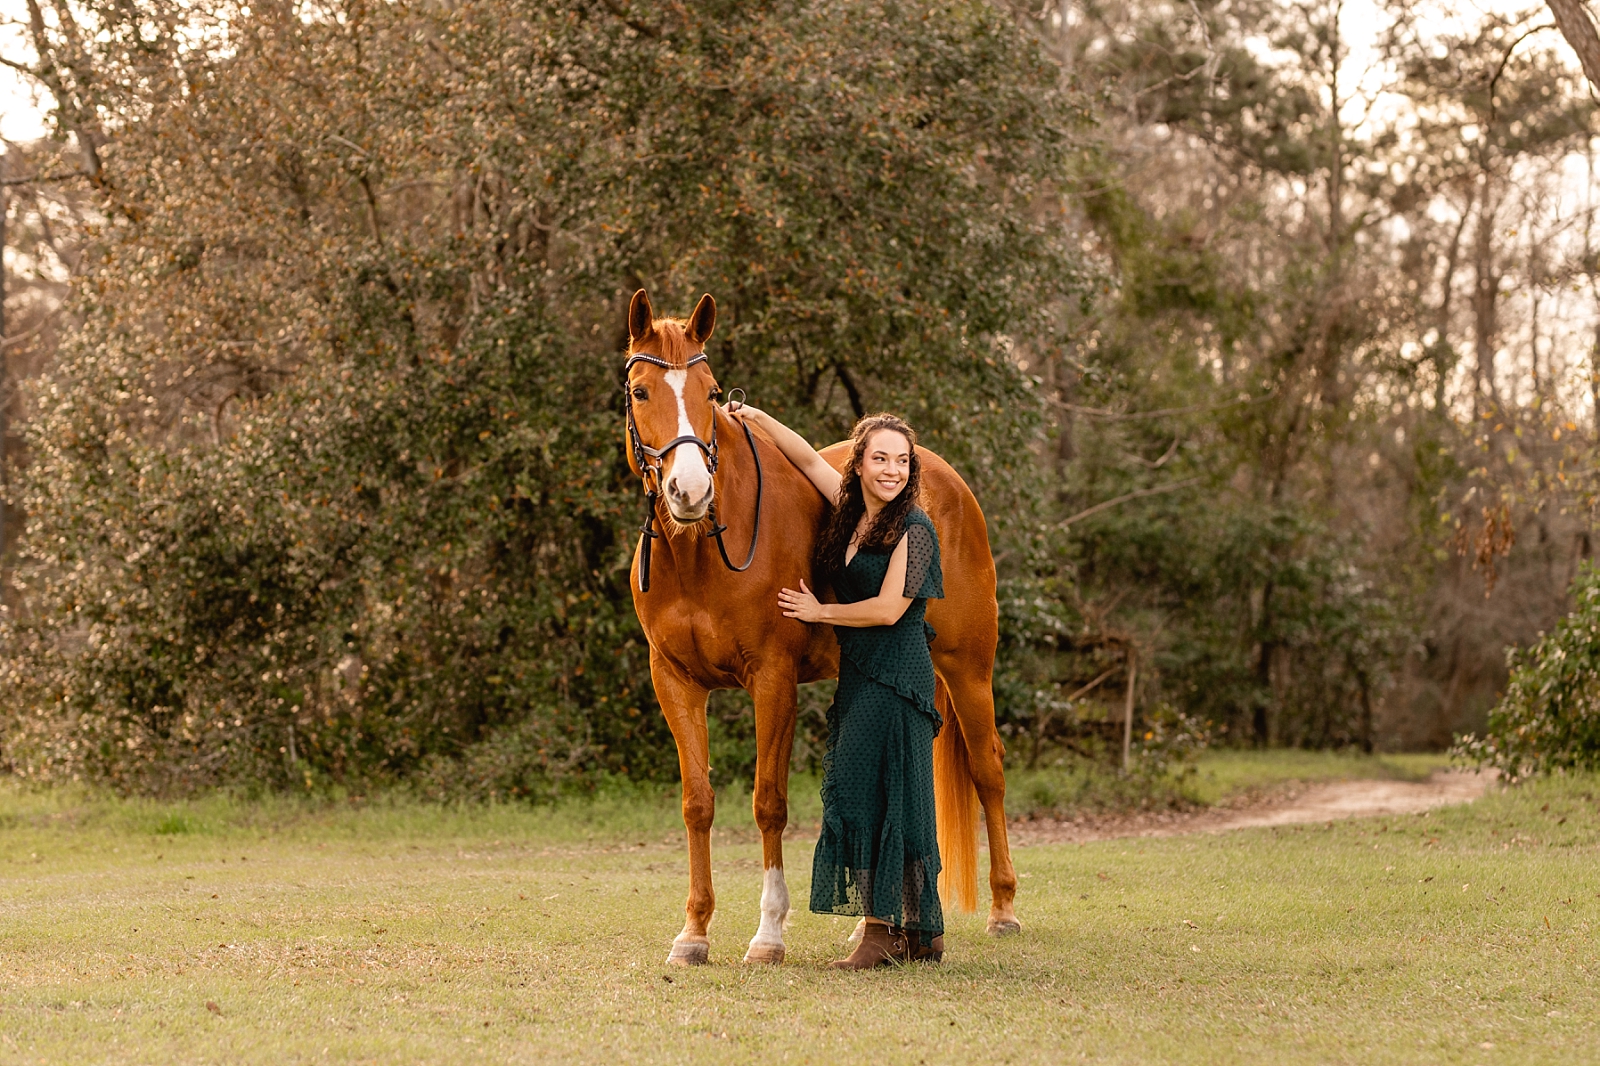 Dressage photographer in North Florida. Spoon Blue Stables in Tallahassee, FL. Chestnut warmblood cross mare.